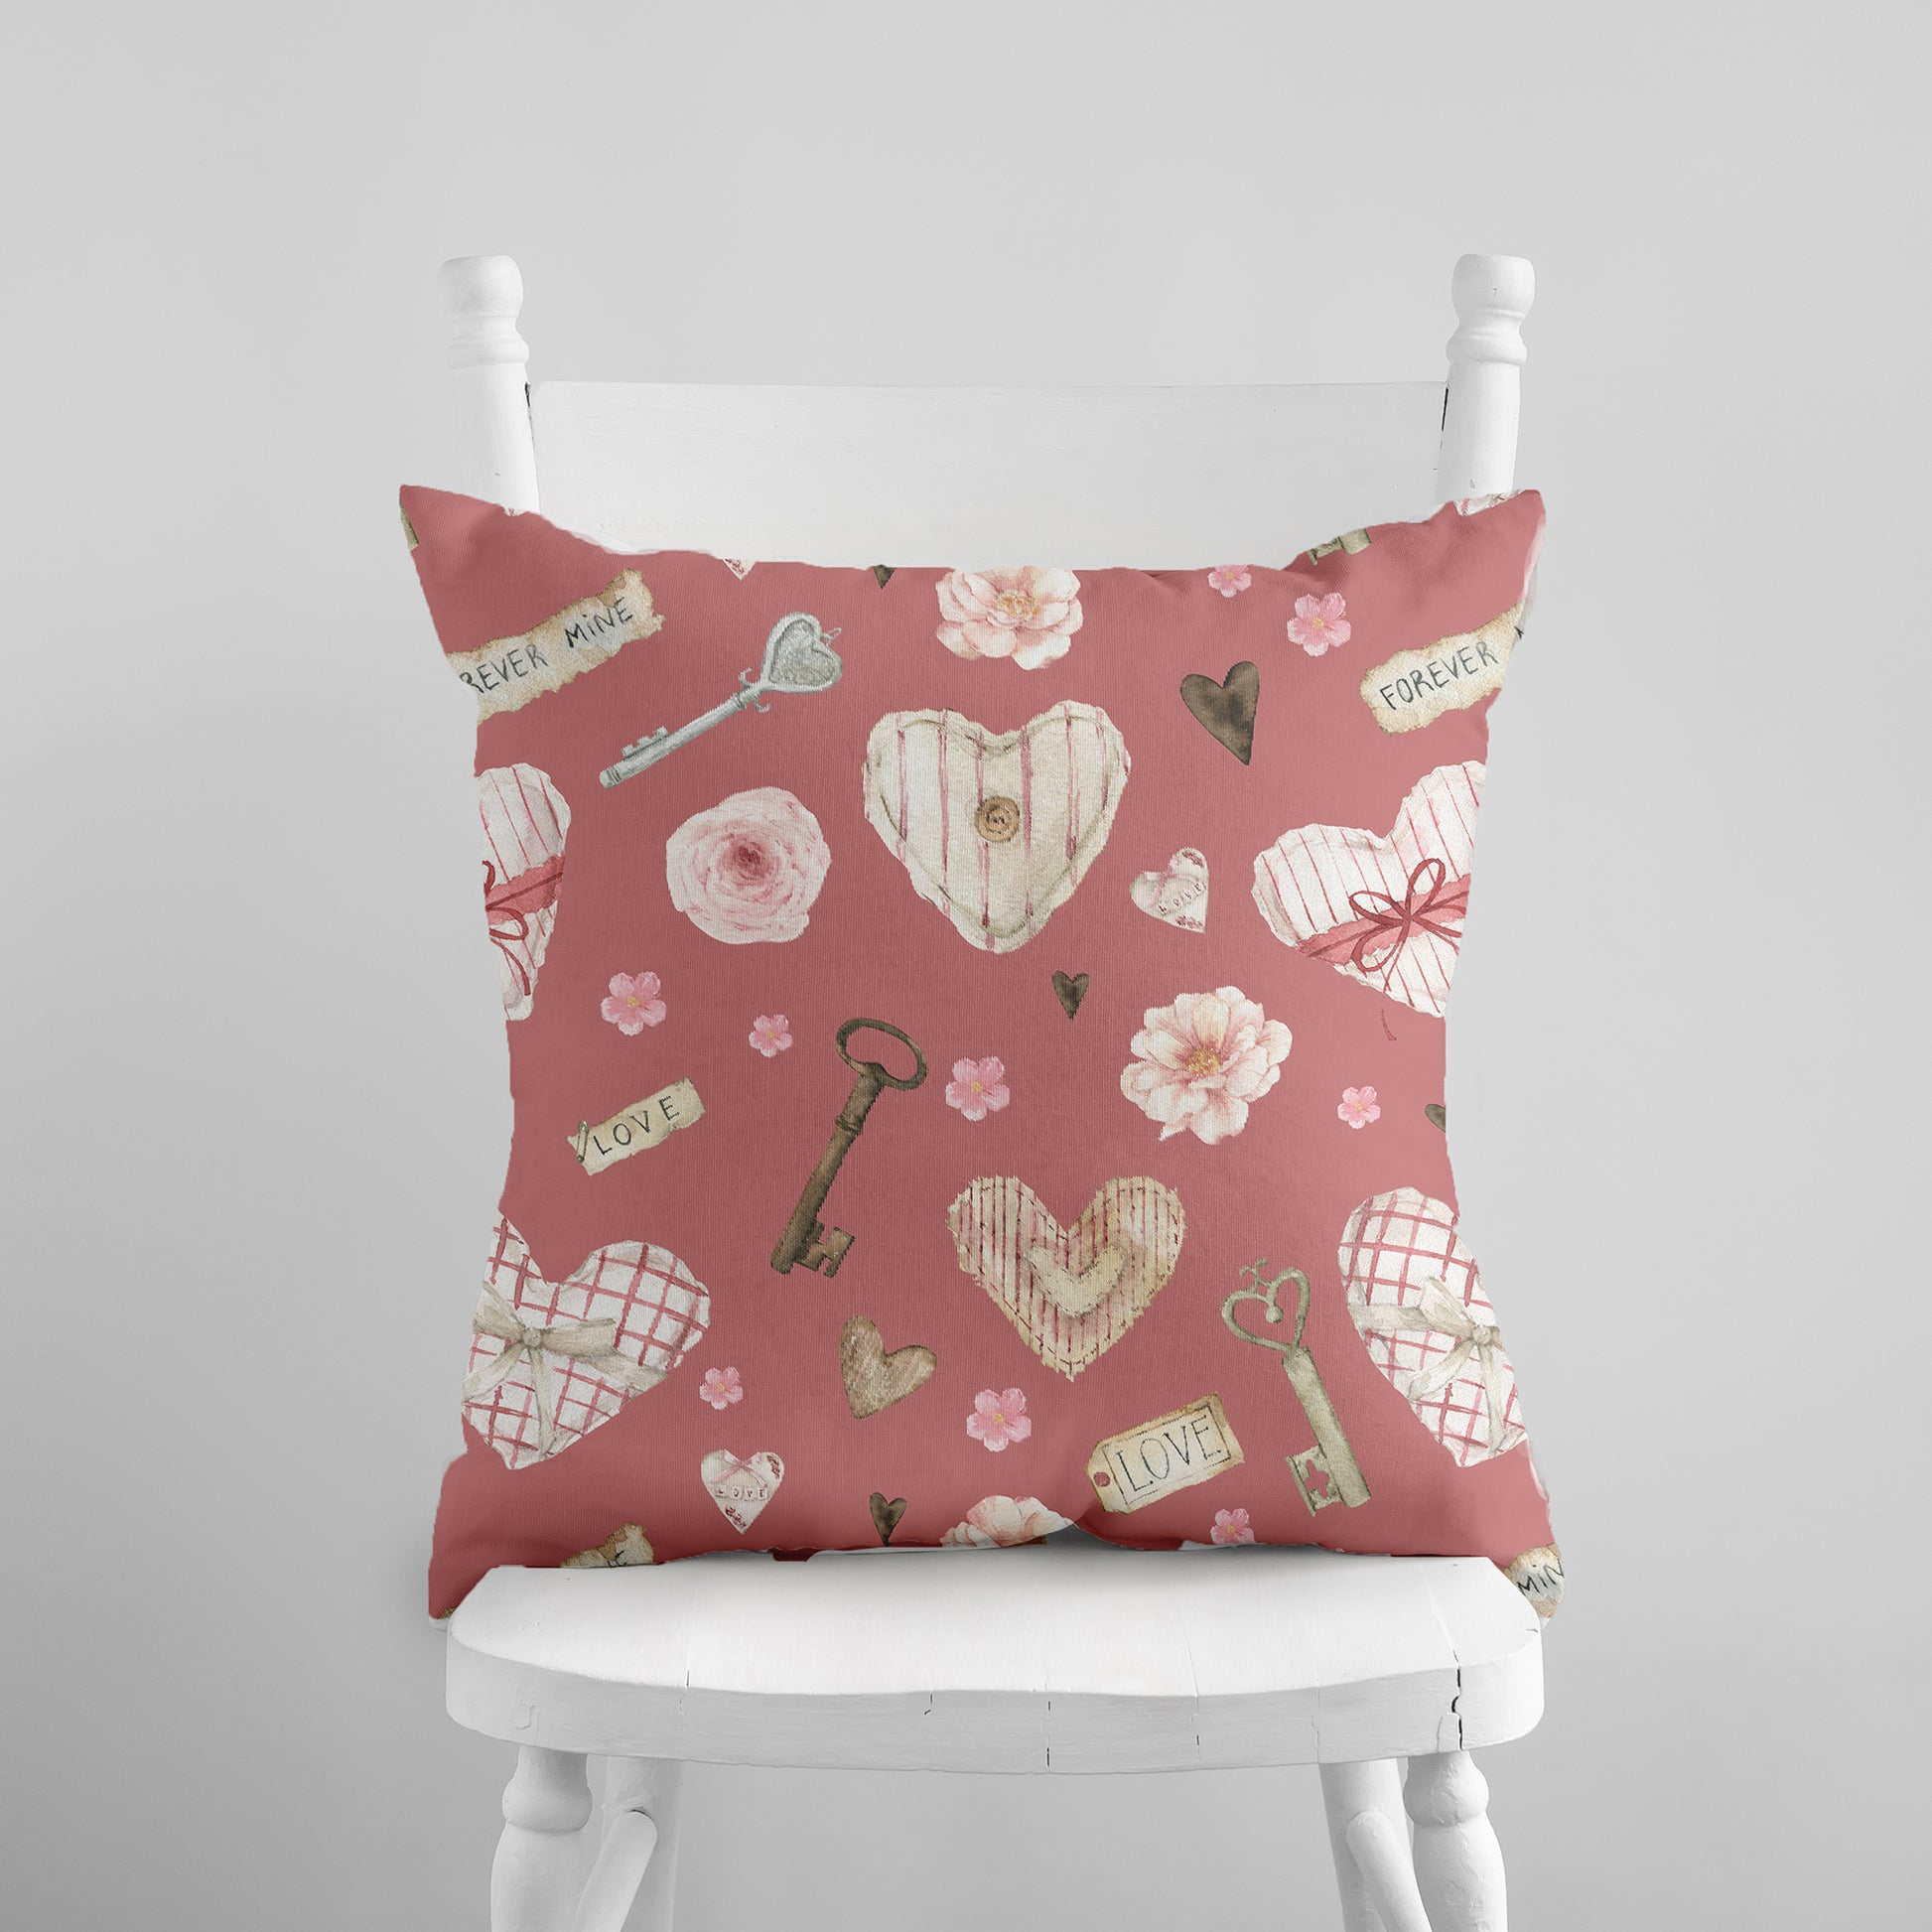 a pink pillow with hearts and keys on it